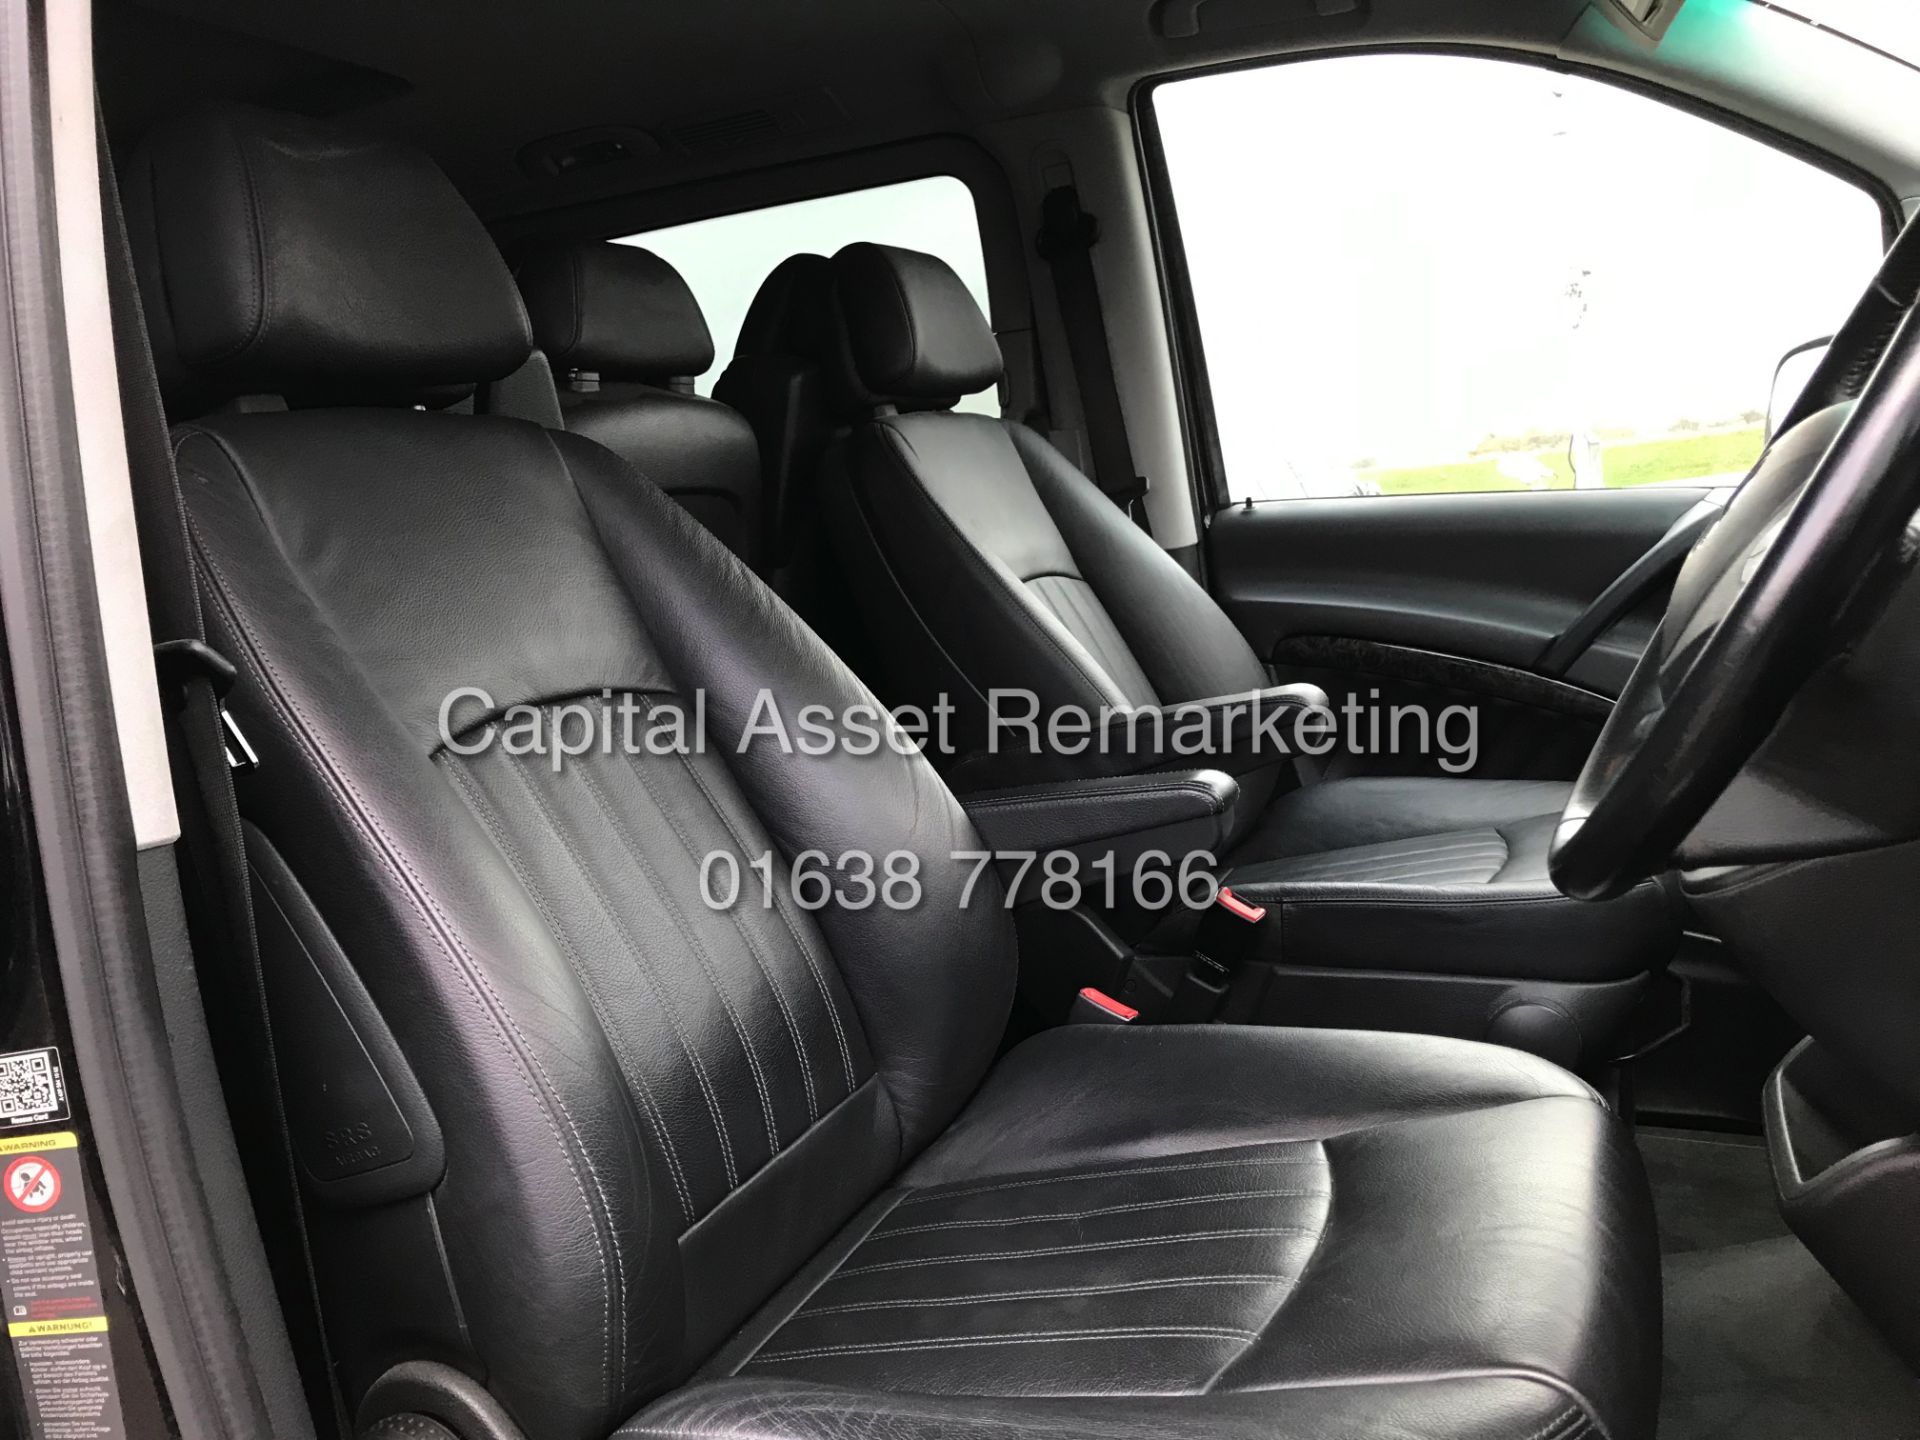 (ON SALE) MERCEDES VIANO 2.2CDI "AMBIENET" XLWB 8 SEATER (14 REG) 1 OWNER - FULLY LOADED - LEATHER - Image 11 of 28